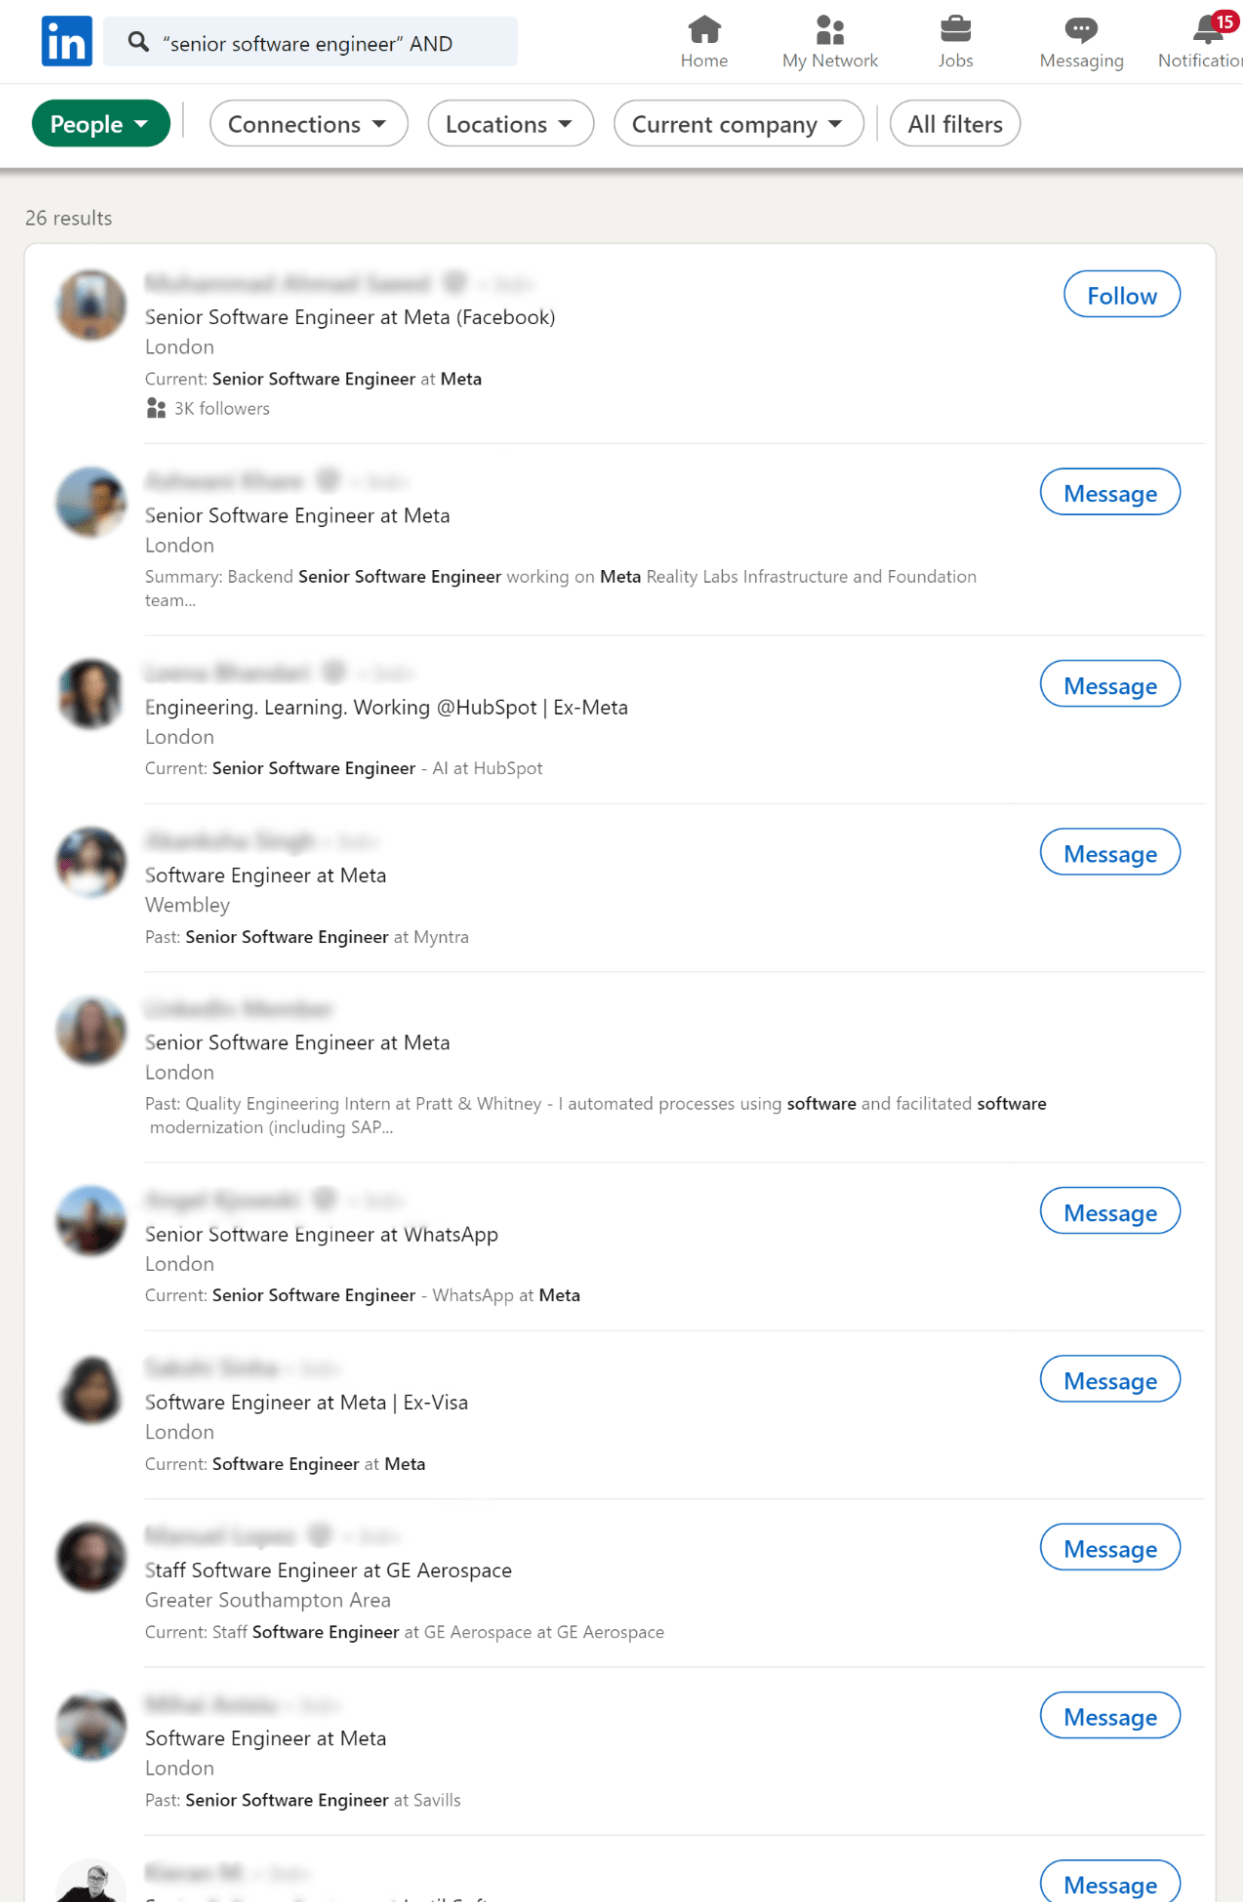 An example of an advanced LinkedIn boolean search for a software engineer